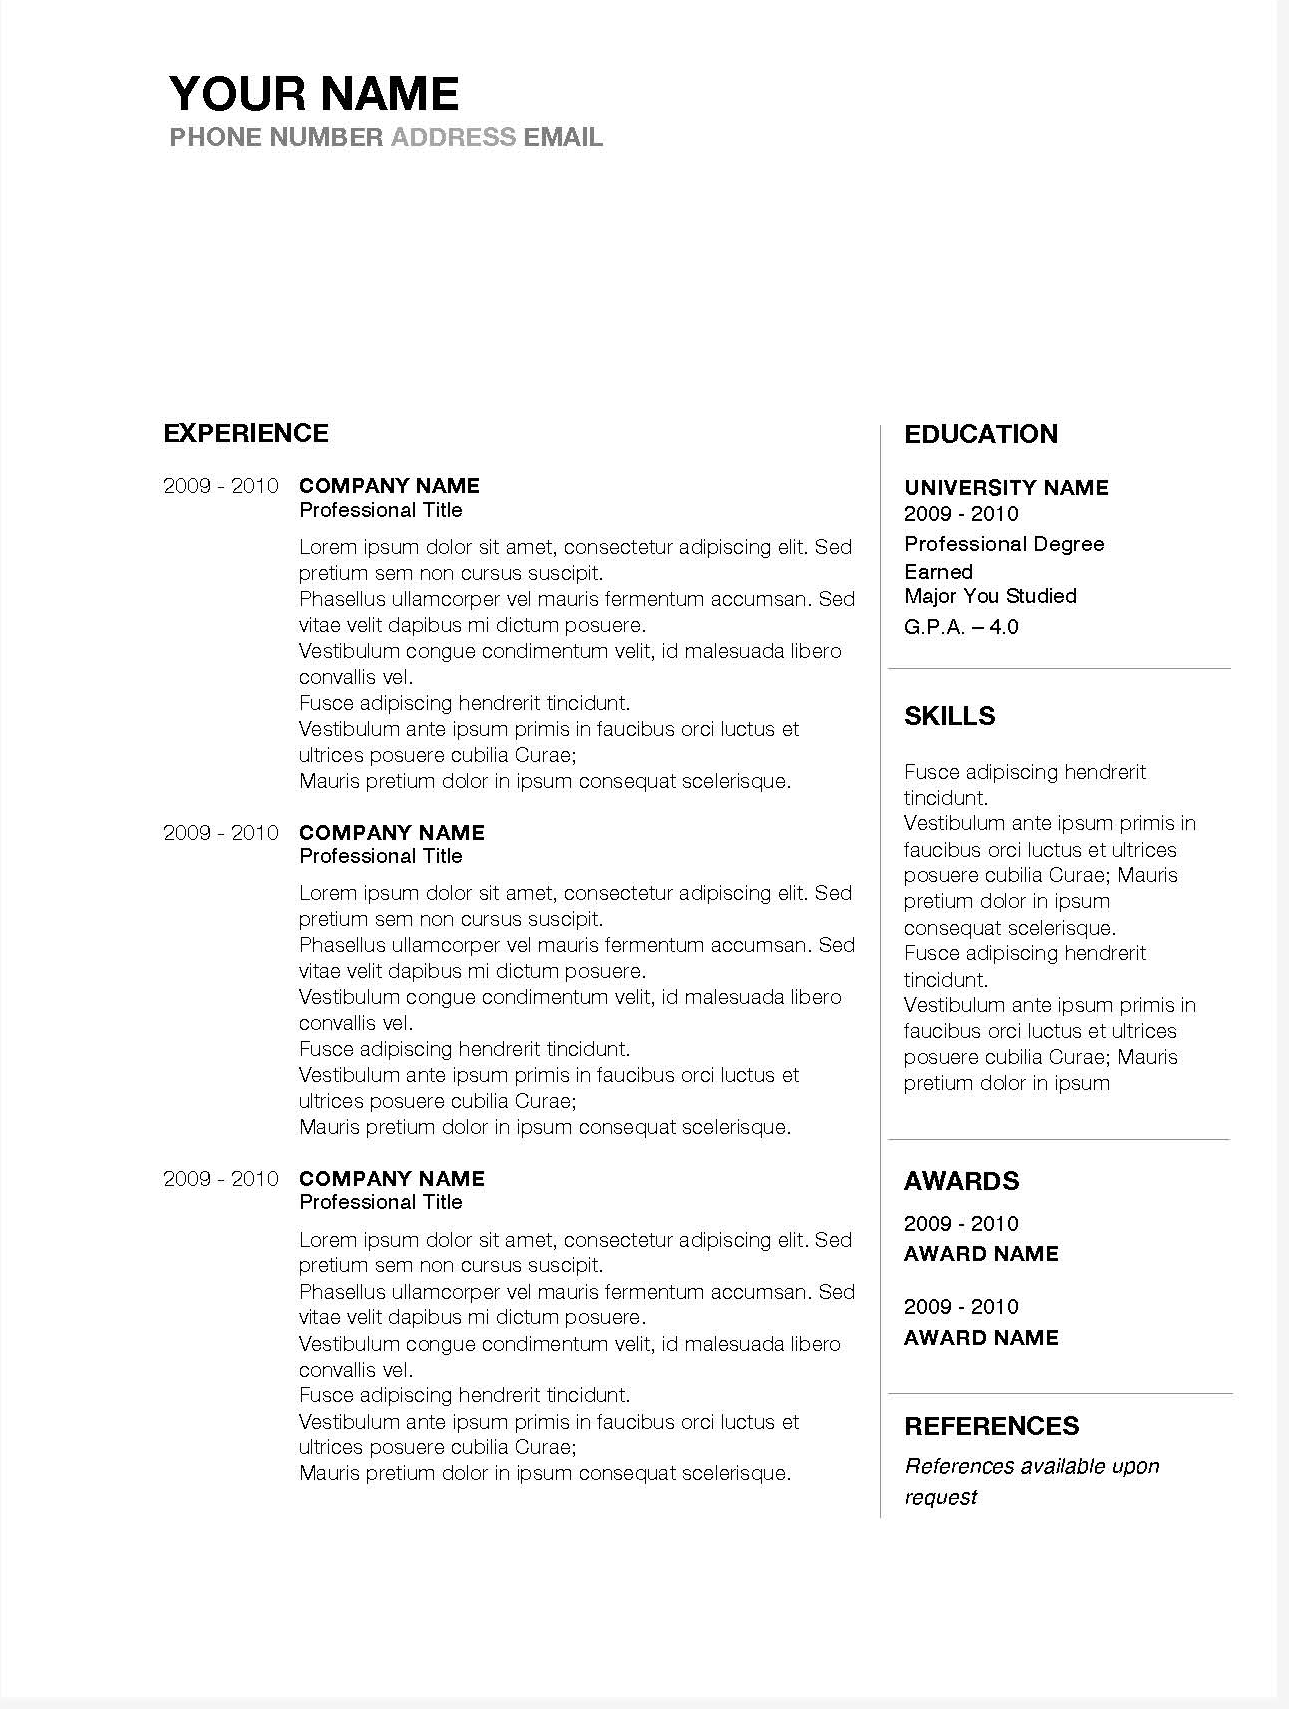 Free Resume Templates Microsoft Word Space In Between 5 Free Microsoft Word Cv Resume Templates free resume templates microsoft word|wikiresume.com